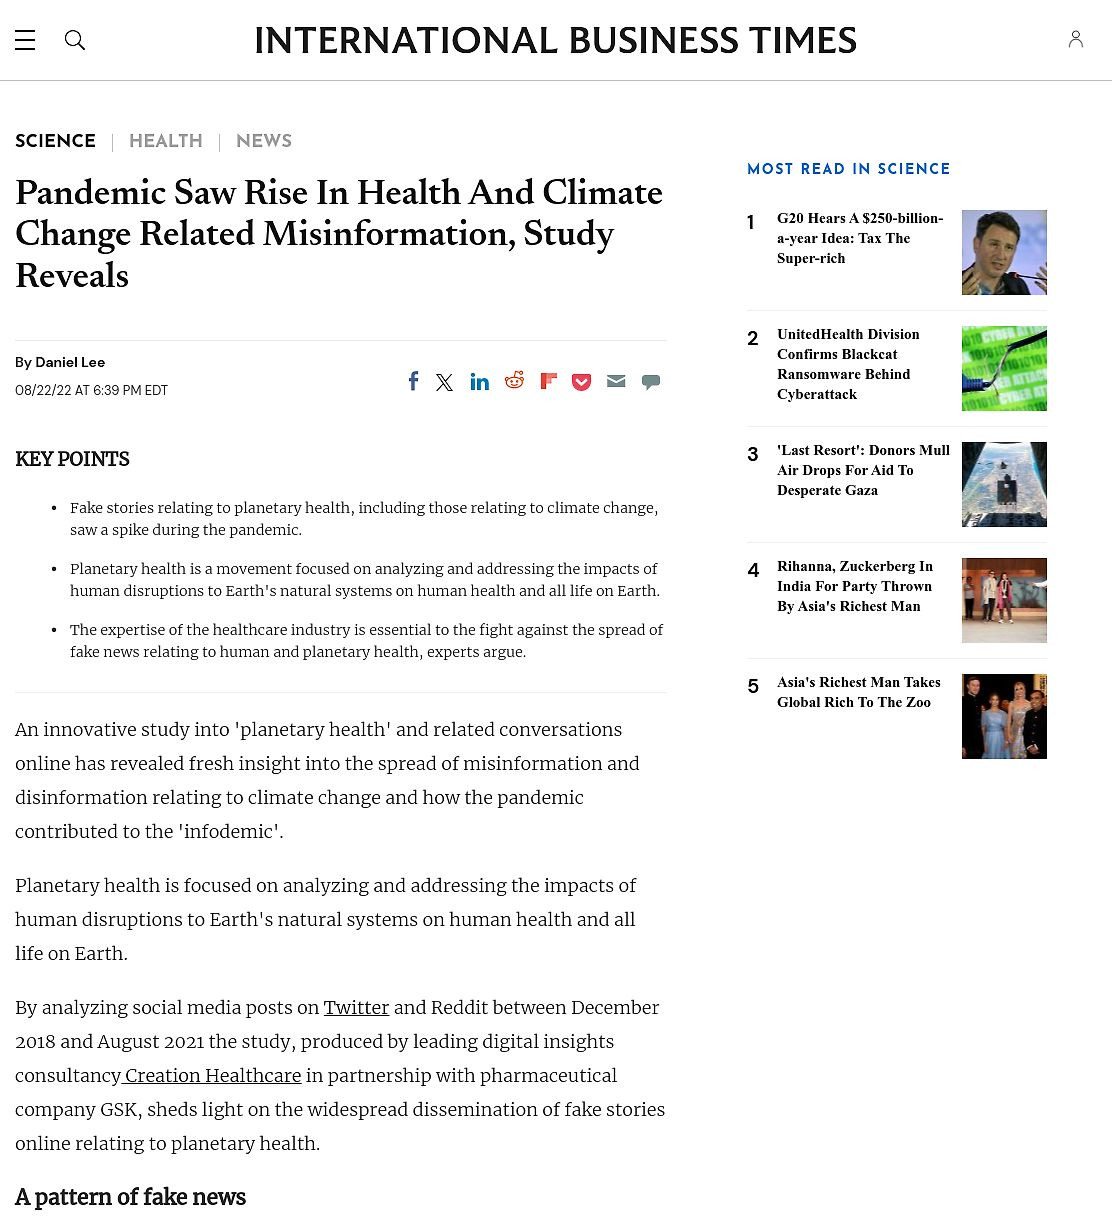 International Business Times -  Pandemic Saw Rise in Health and Climate Change Related Misinformation